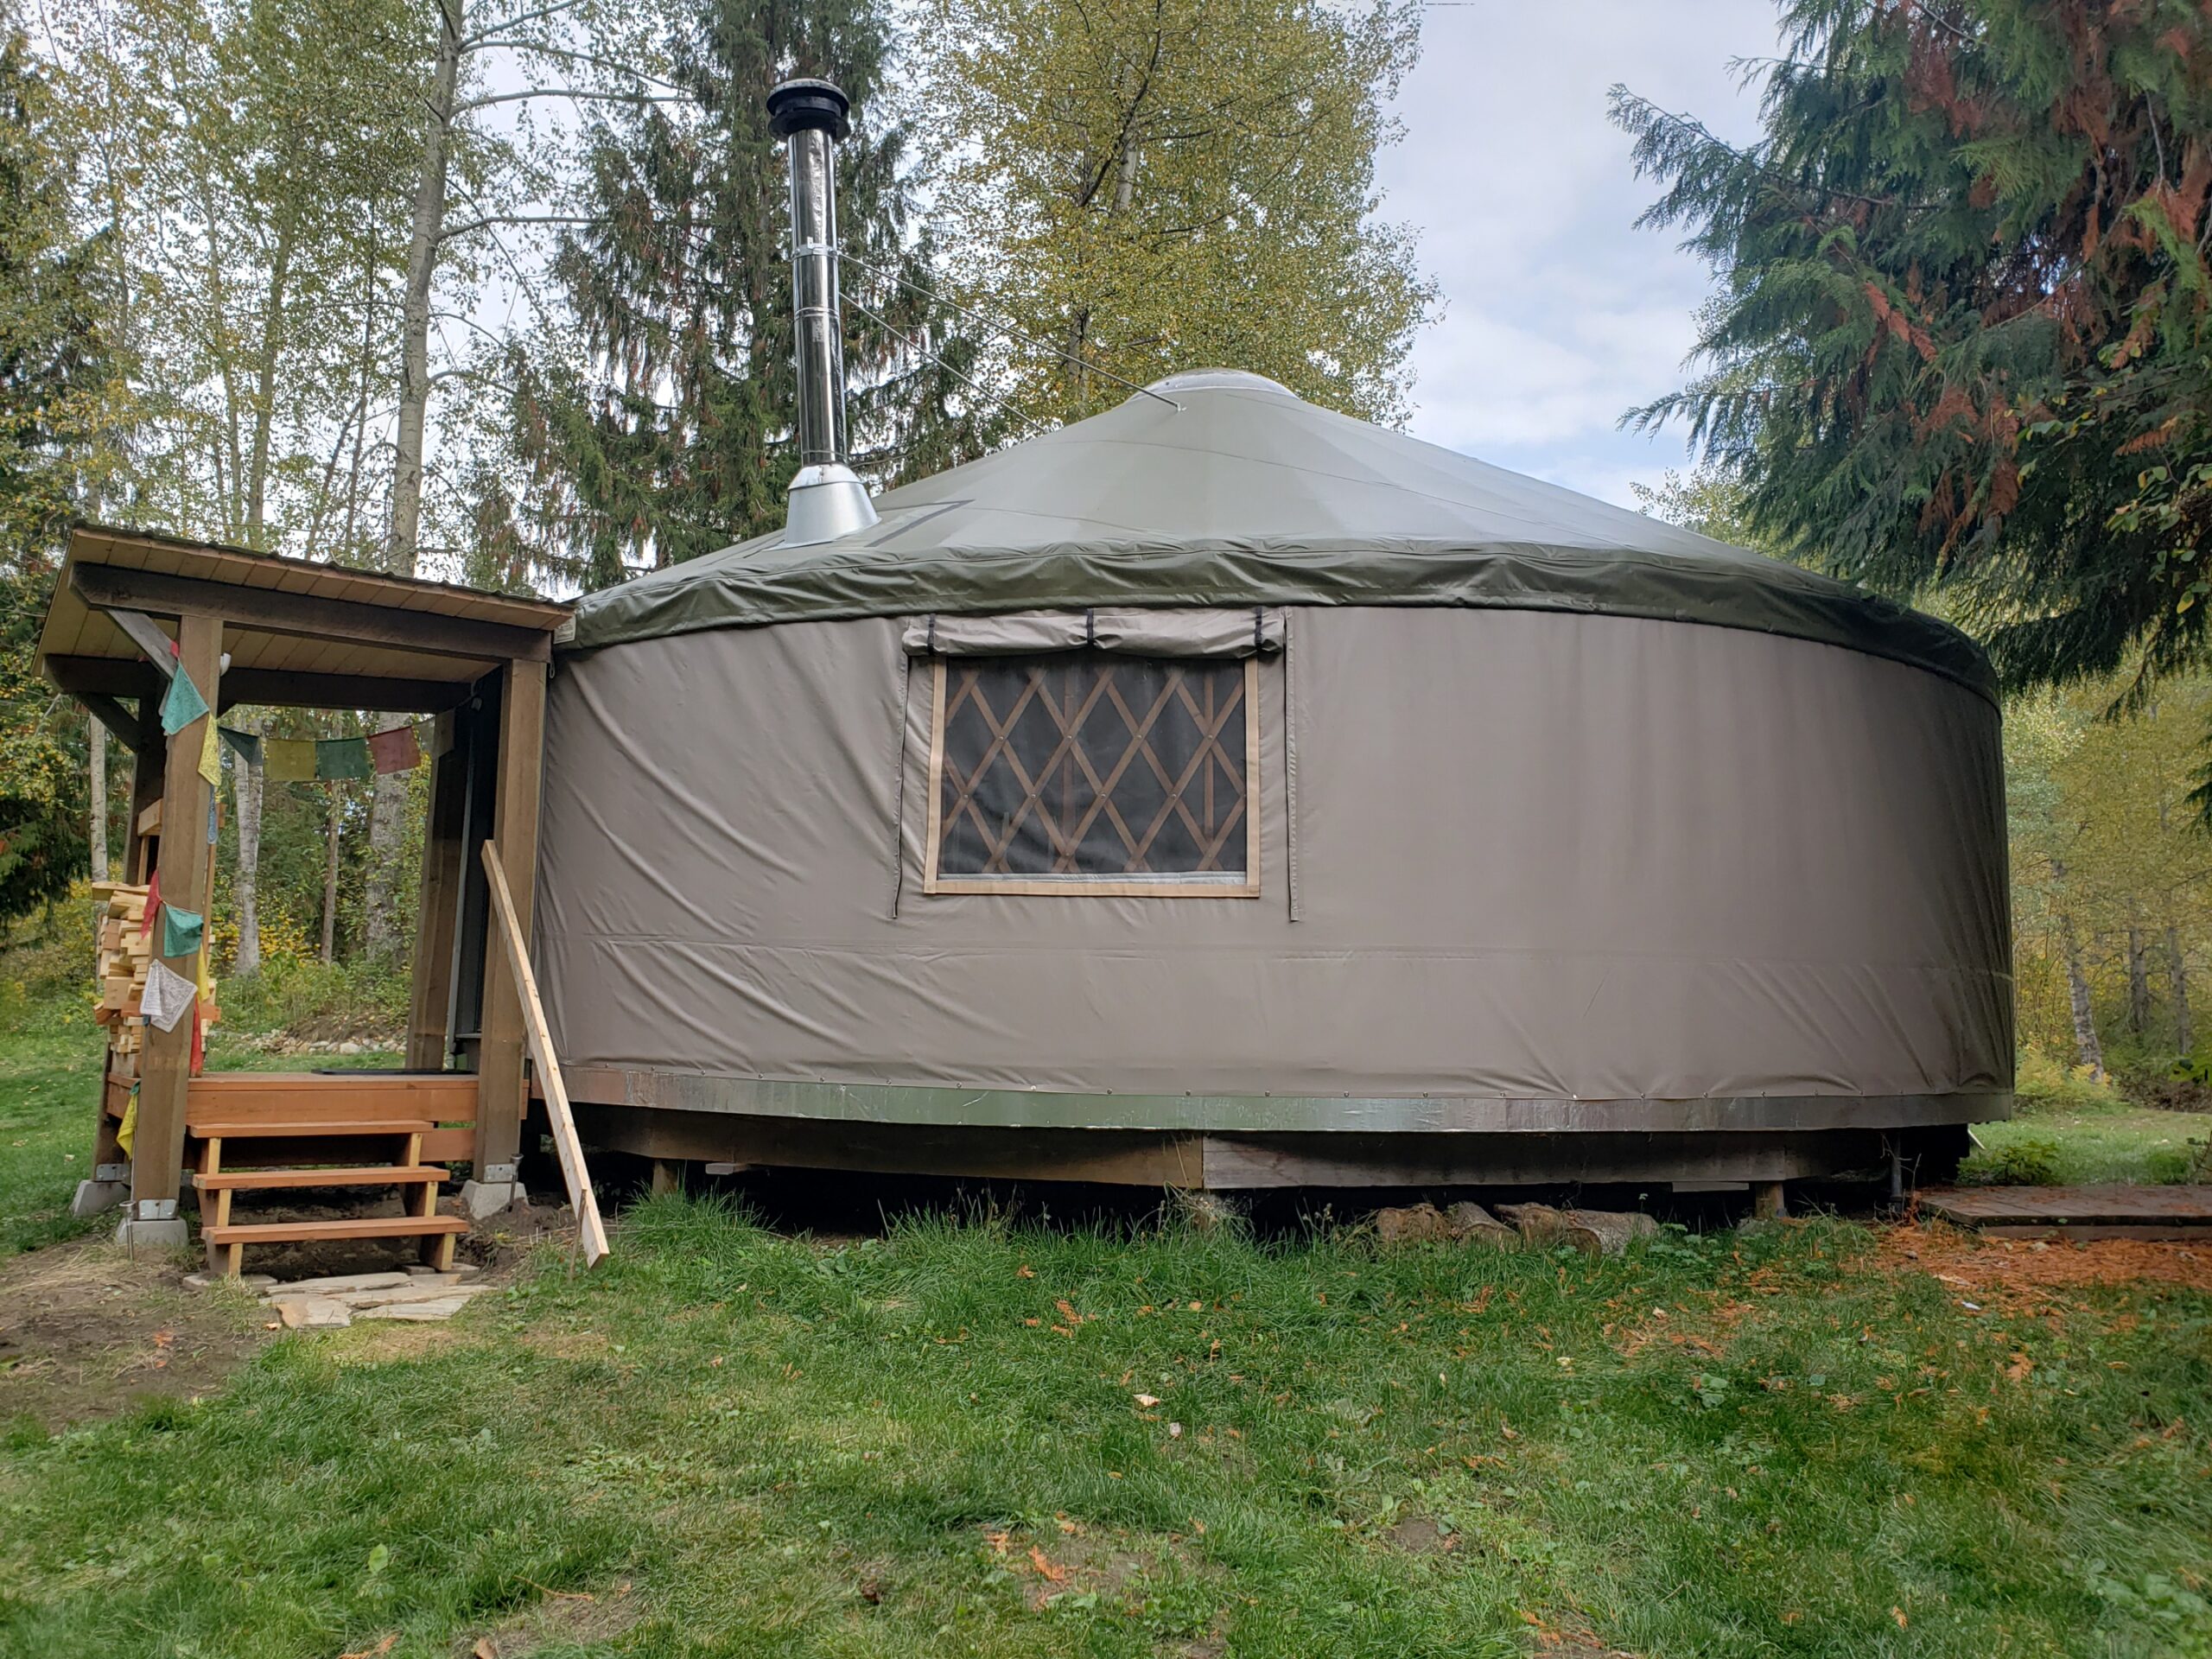 yurt at for-rest retreat